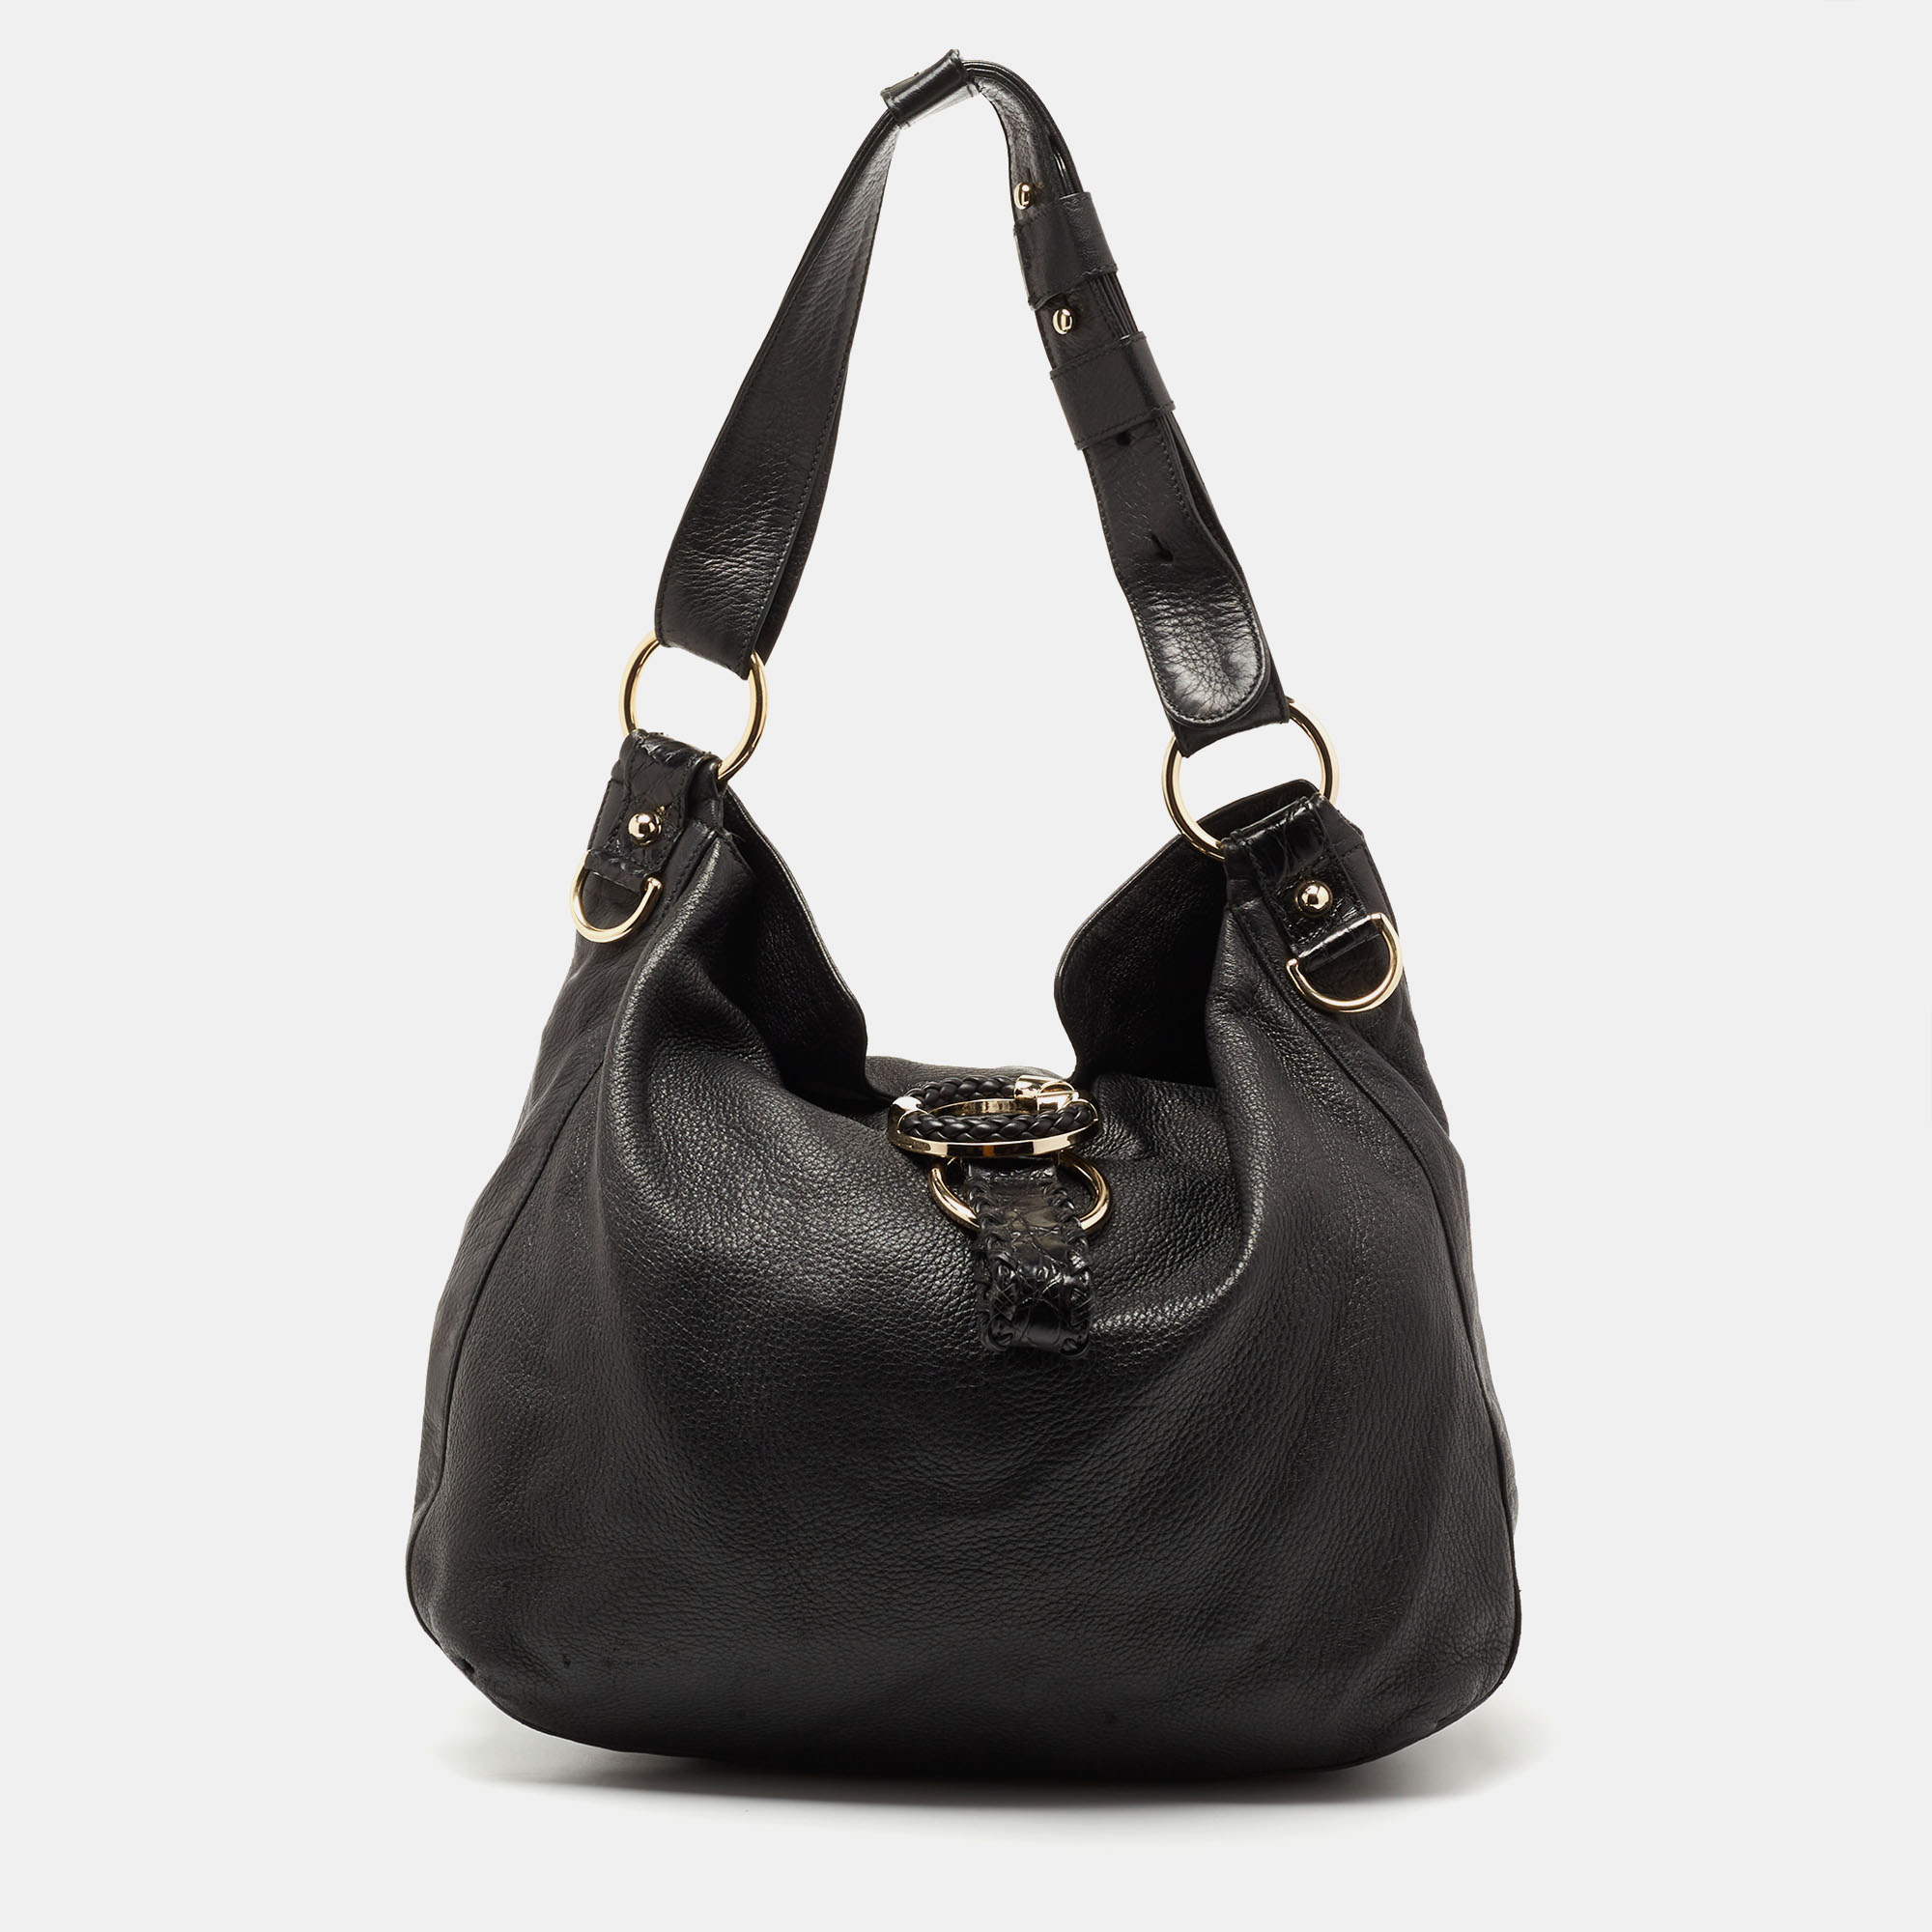 Flaunt your elevated fashion choice by accessorizing this G wave hobo from Gucci with your outfit. Crafted from leather with crocodile trims it is worth the investment. This bag is defined by a shoulder strap a striking lock on the front and a single handle. Lined with fabric it is capable of storing your daily essentials comfortably.